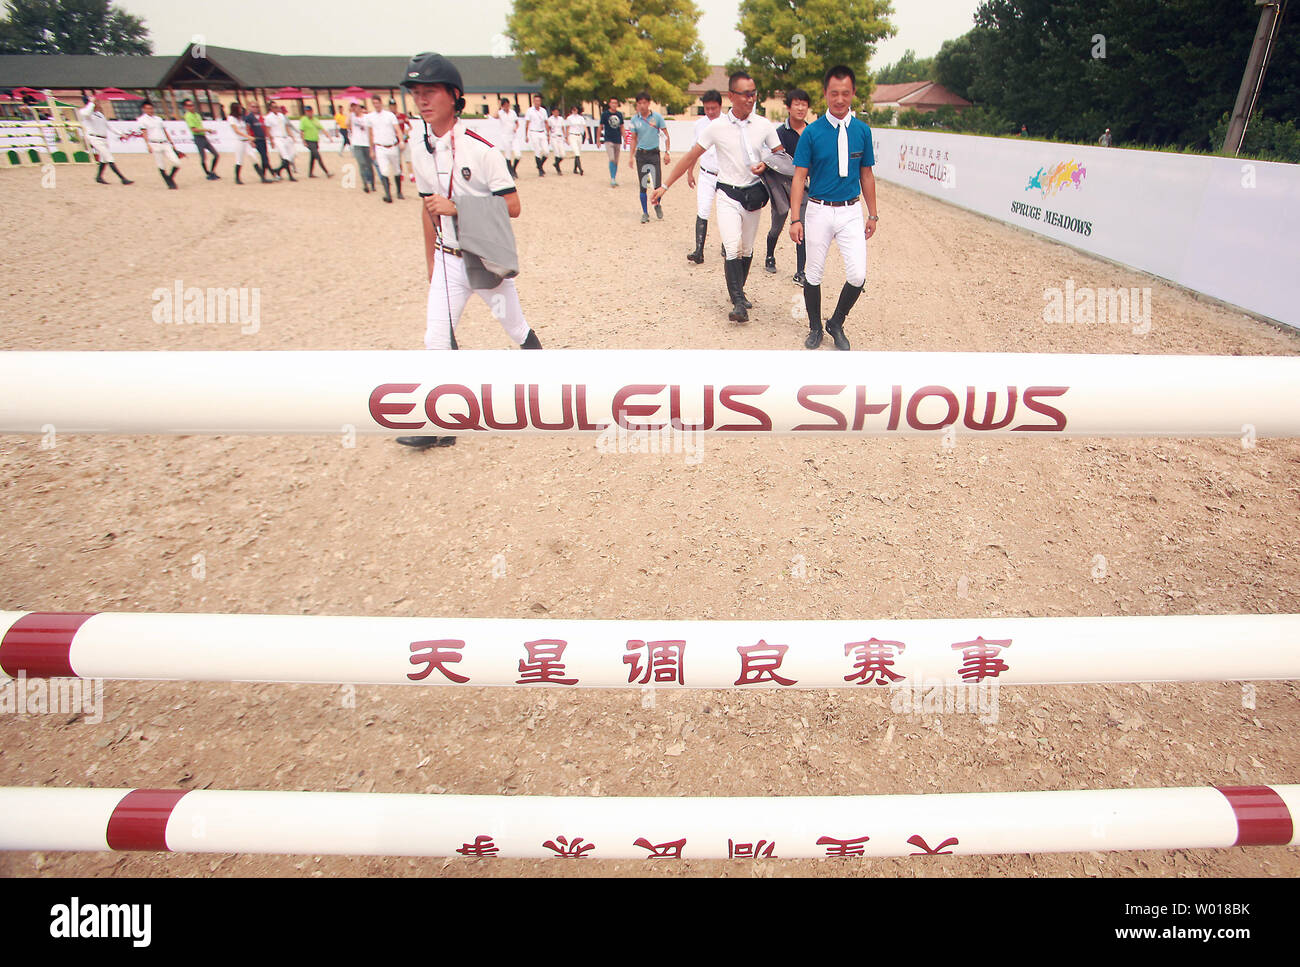 Chinese jockeys count off steps between jumps during the First China Show Jumping Open at the Equuleus International Riding Club in Beijing on August 16, 2015.  China's wealth gap has widened to a level where it is among the world's most unequal nations, according to a Chinese academic, as huge numbers of poor are left behind by the economic boom.  The country's  growing wealth gap is a major concern for Communist authorities, who are keen to avoid public discontent that could lead to social unrest in the country of 1.3 billion people.      Photo by Stephen Shaver/UPI Stock Photo